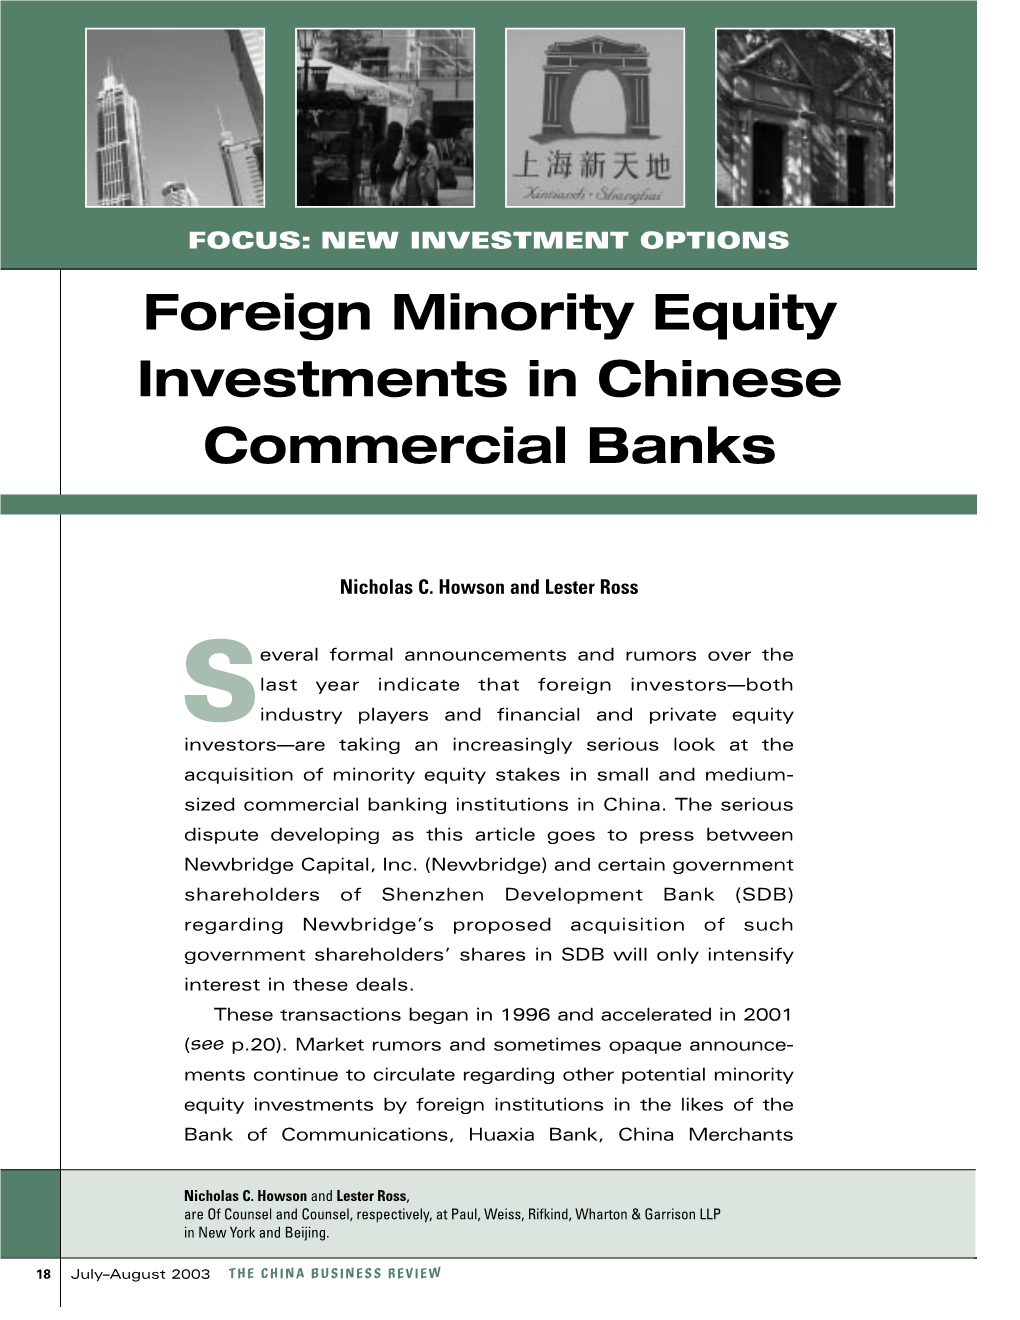 Foreign Minority Equity Investments in Chinese Commercial Banks